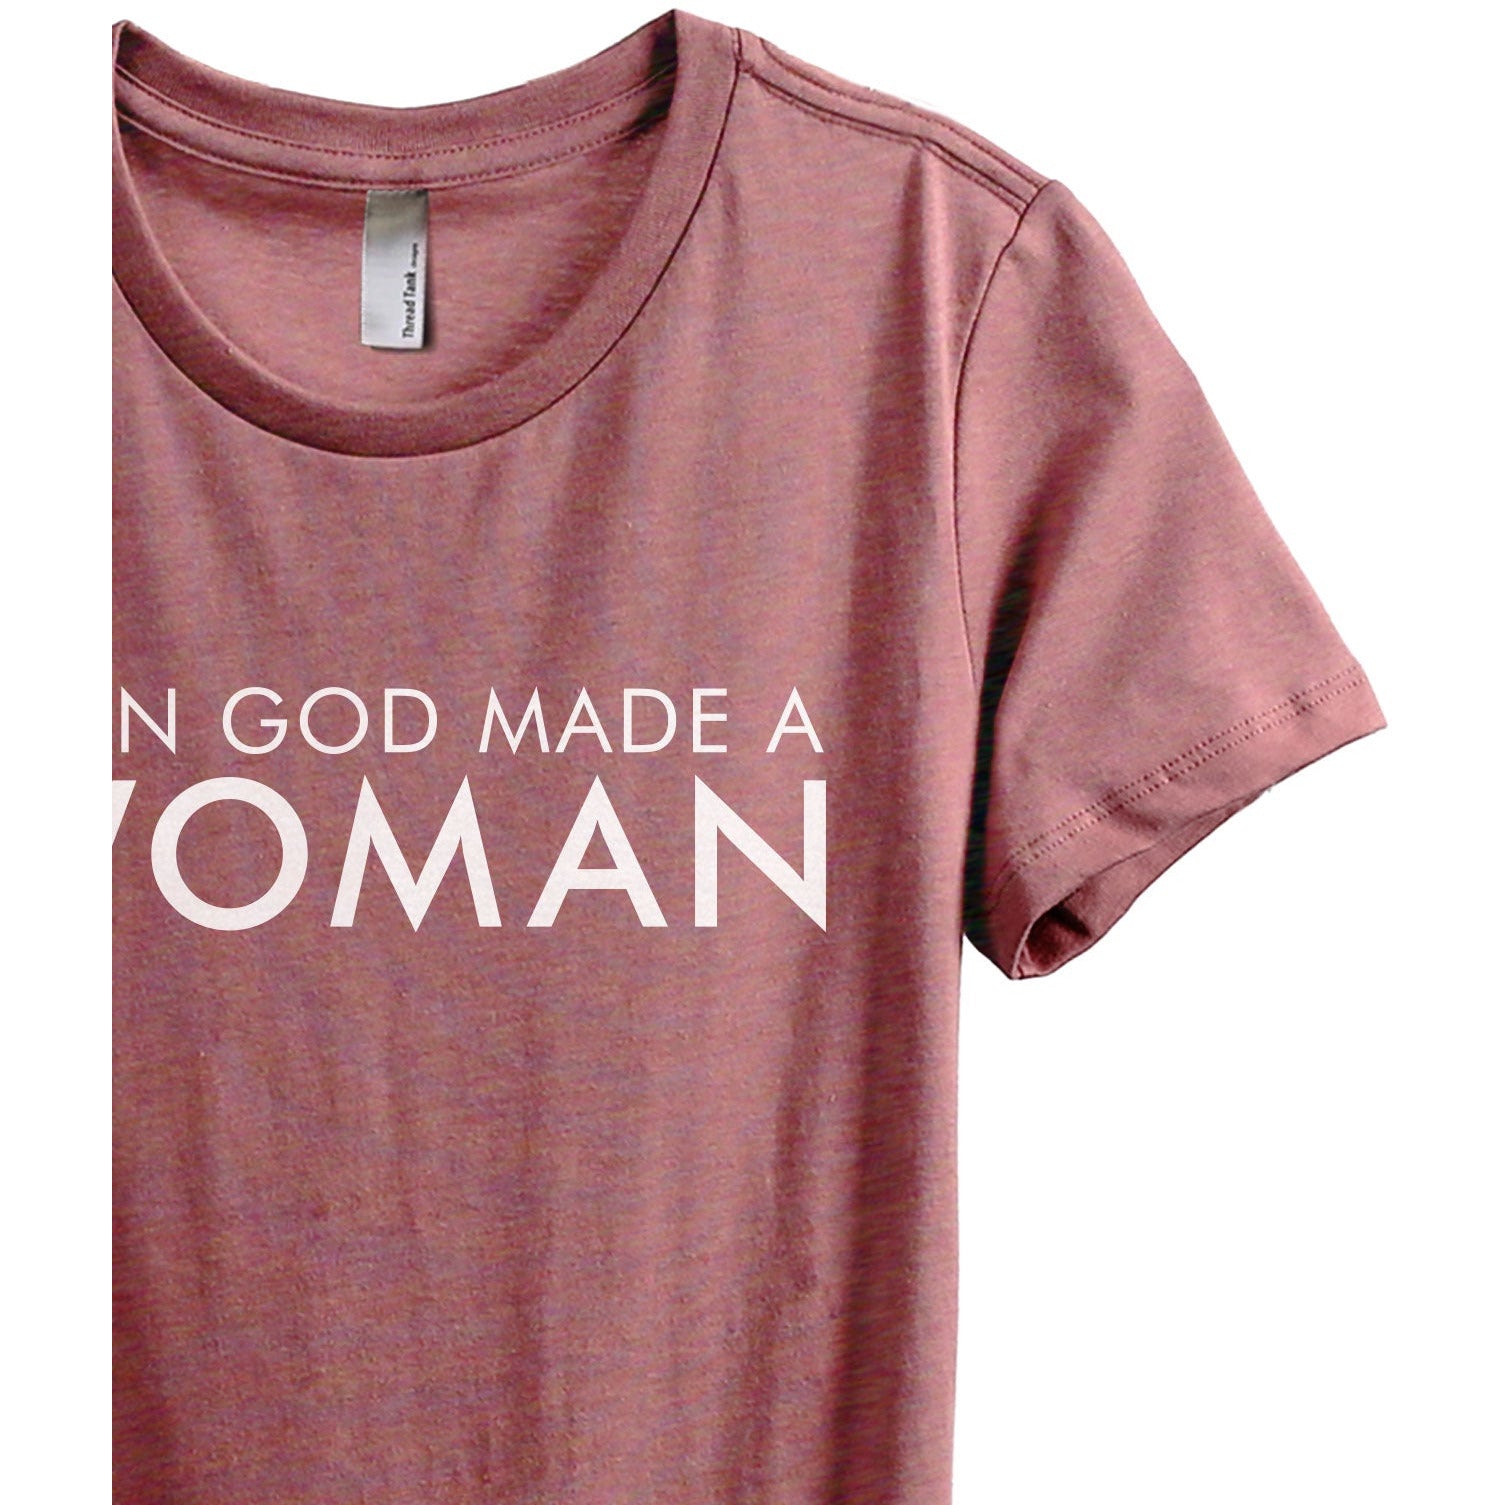 Then God Made A Woman - Stories You Can Wear